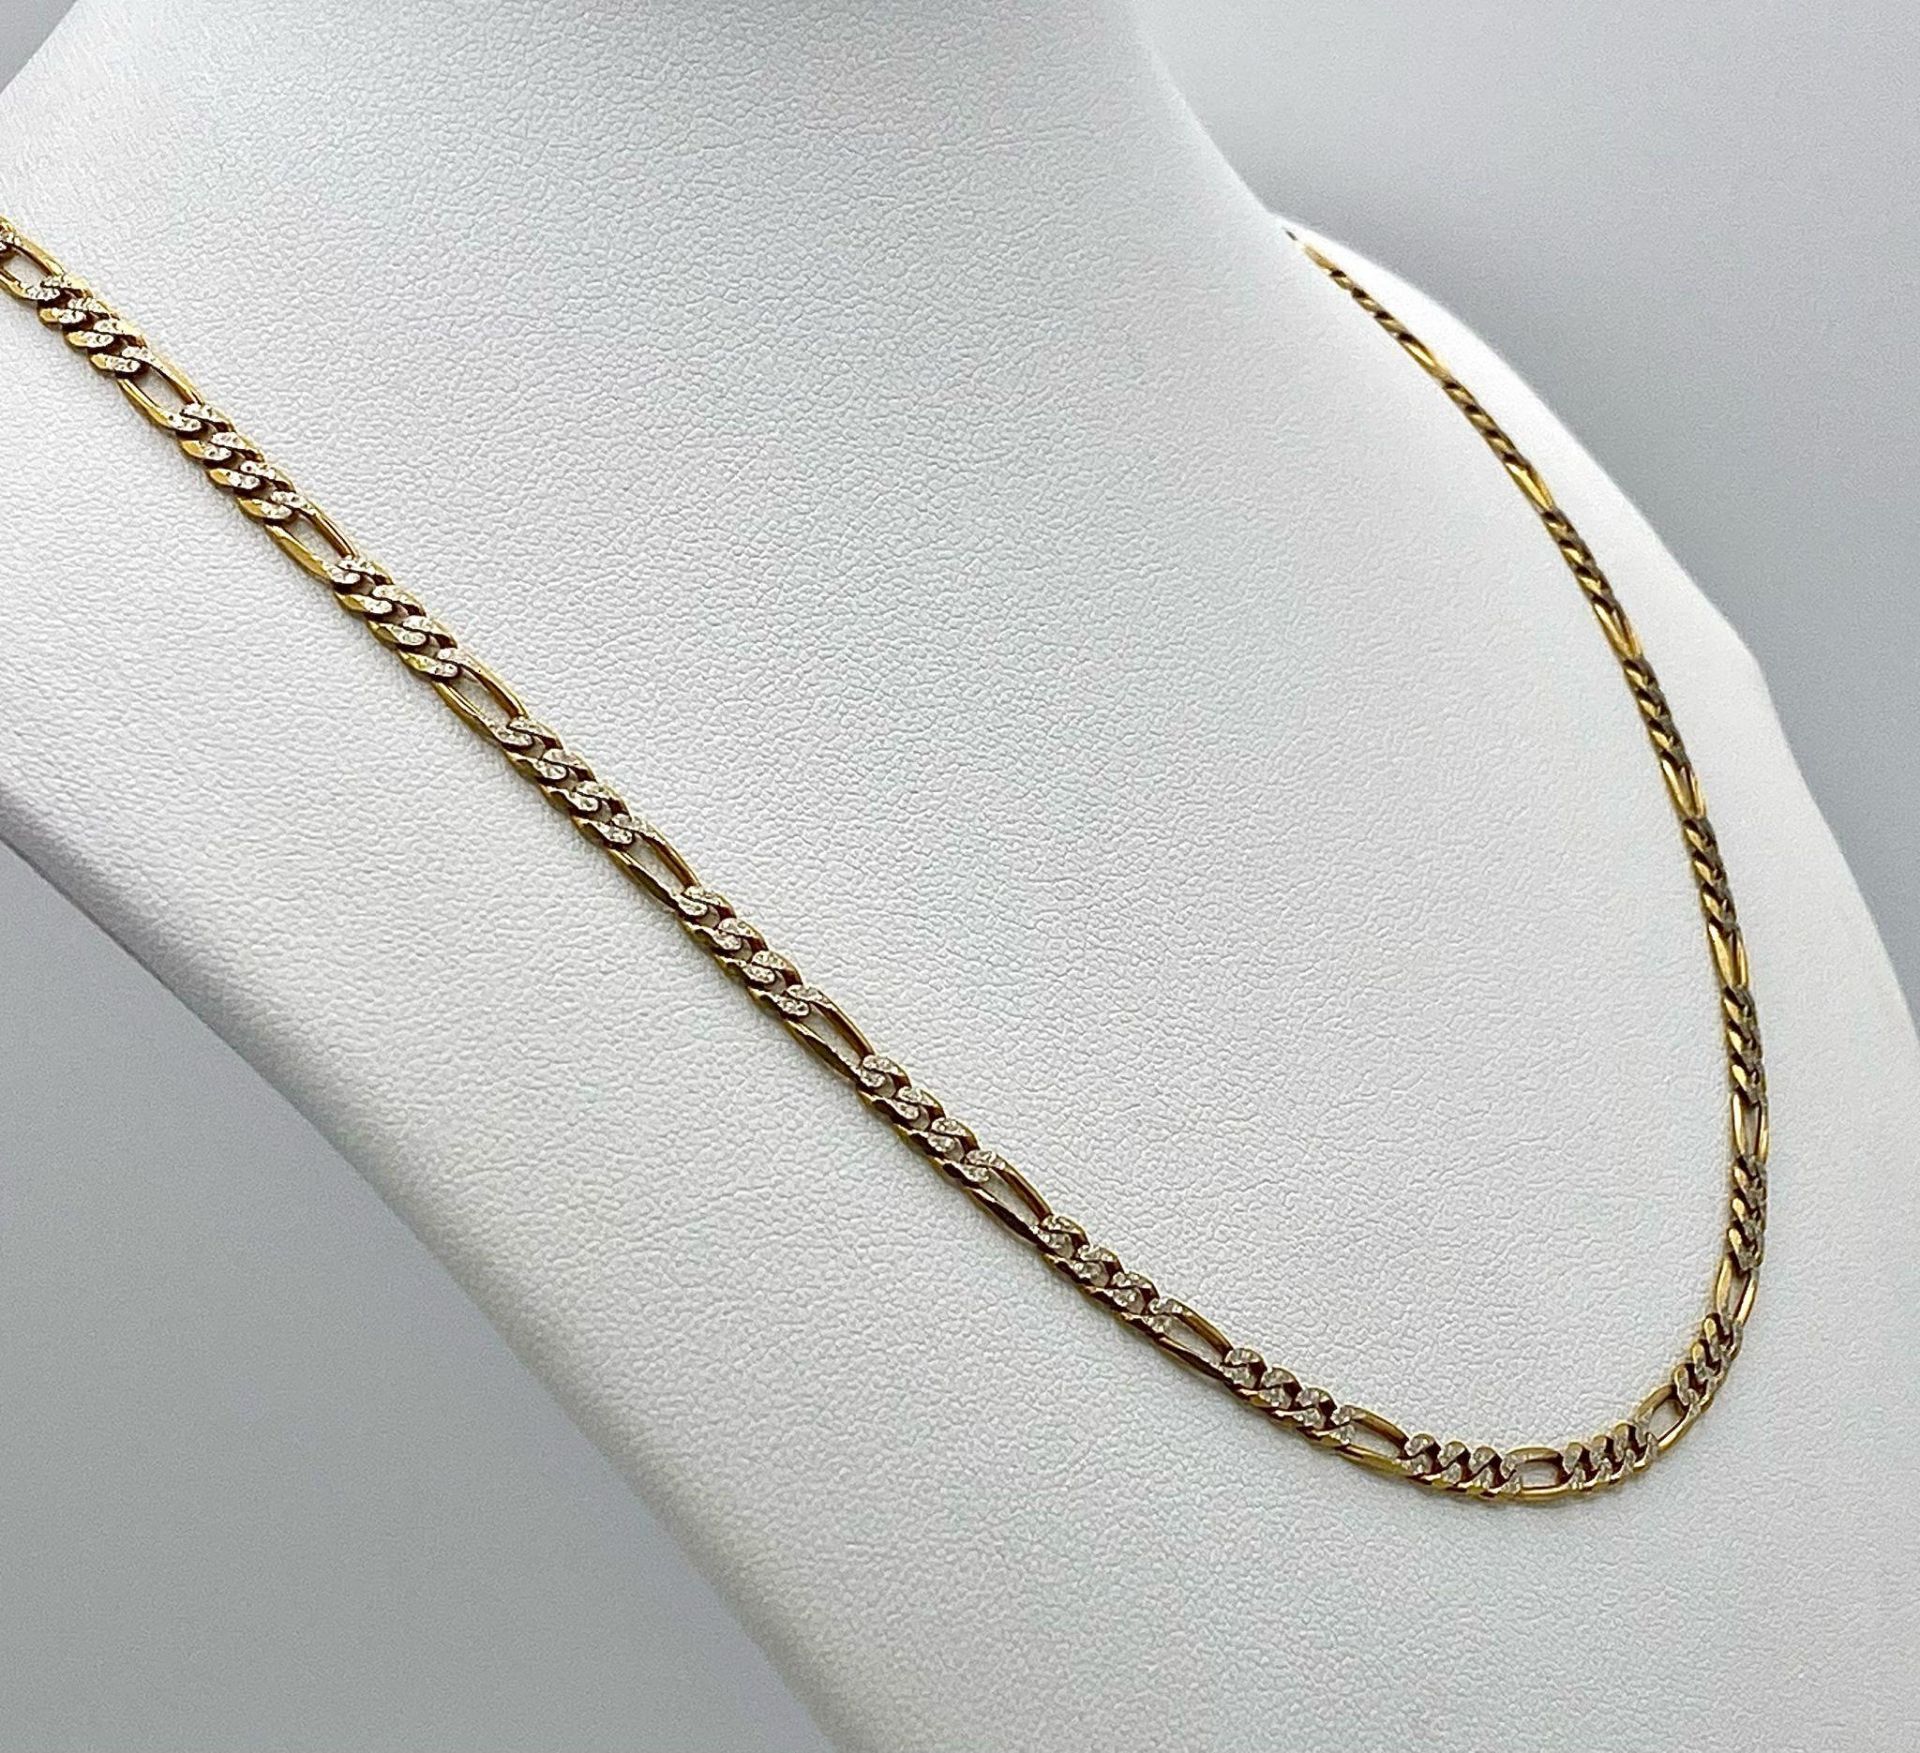 A 9K Yellow and White Gold Italian Figaro Link Necklace. 45cm length. 8.82g weight. - Image 2 of 7